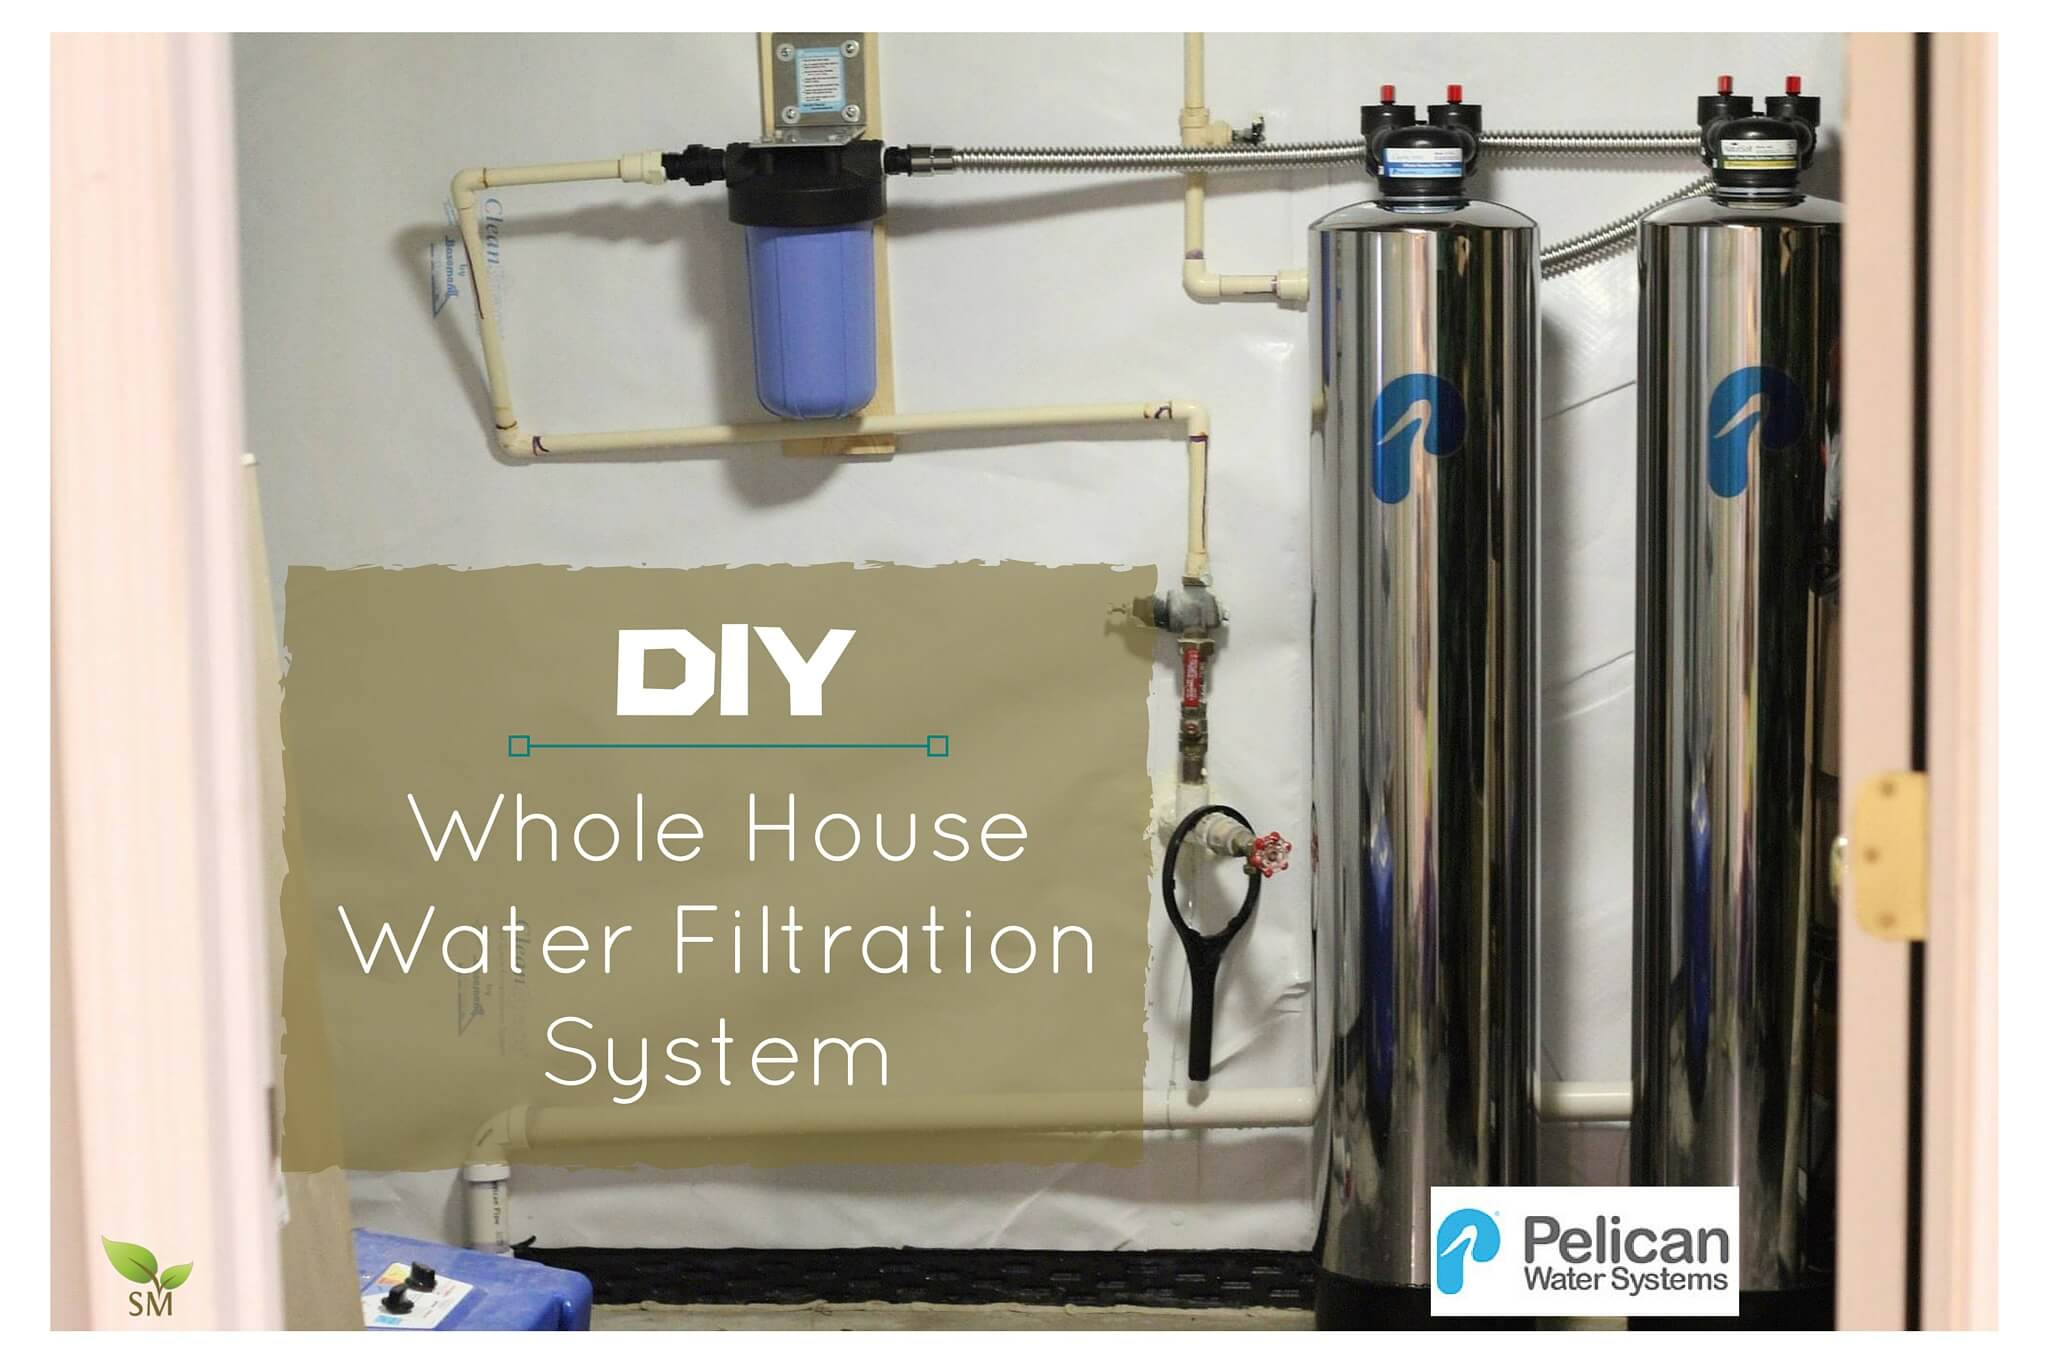 DIY Water Filtration Systems Home
 Diy Home Water Purification System DIY Projects